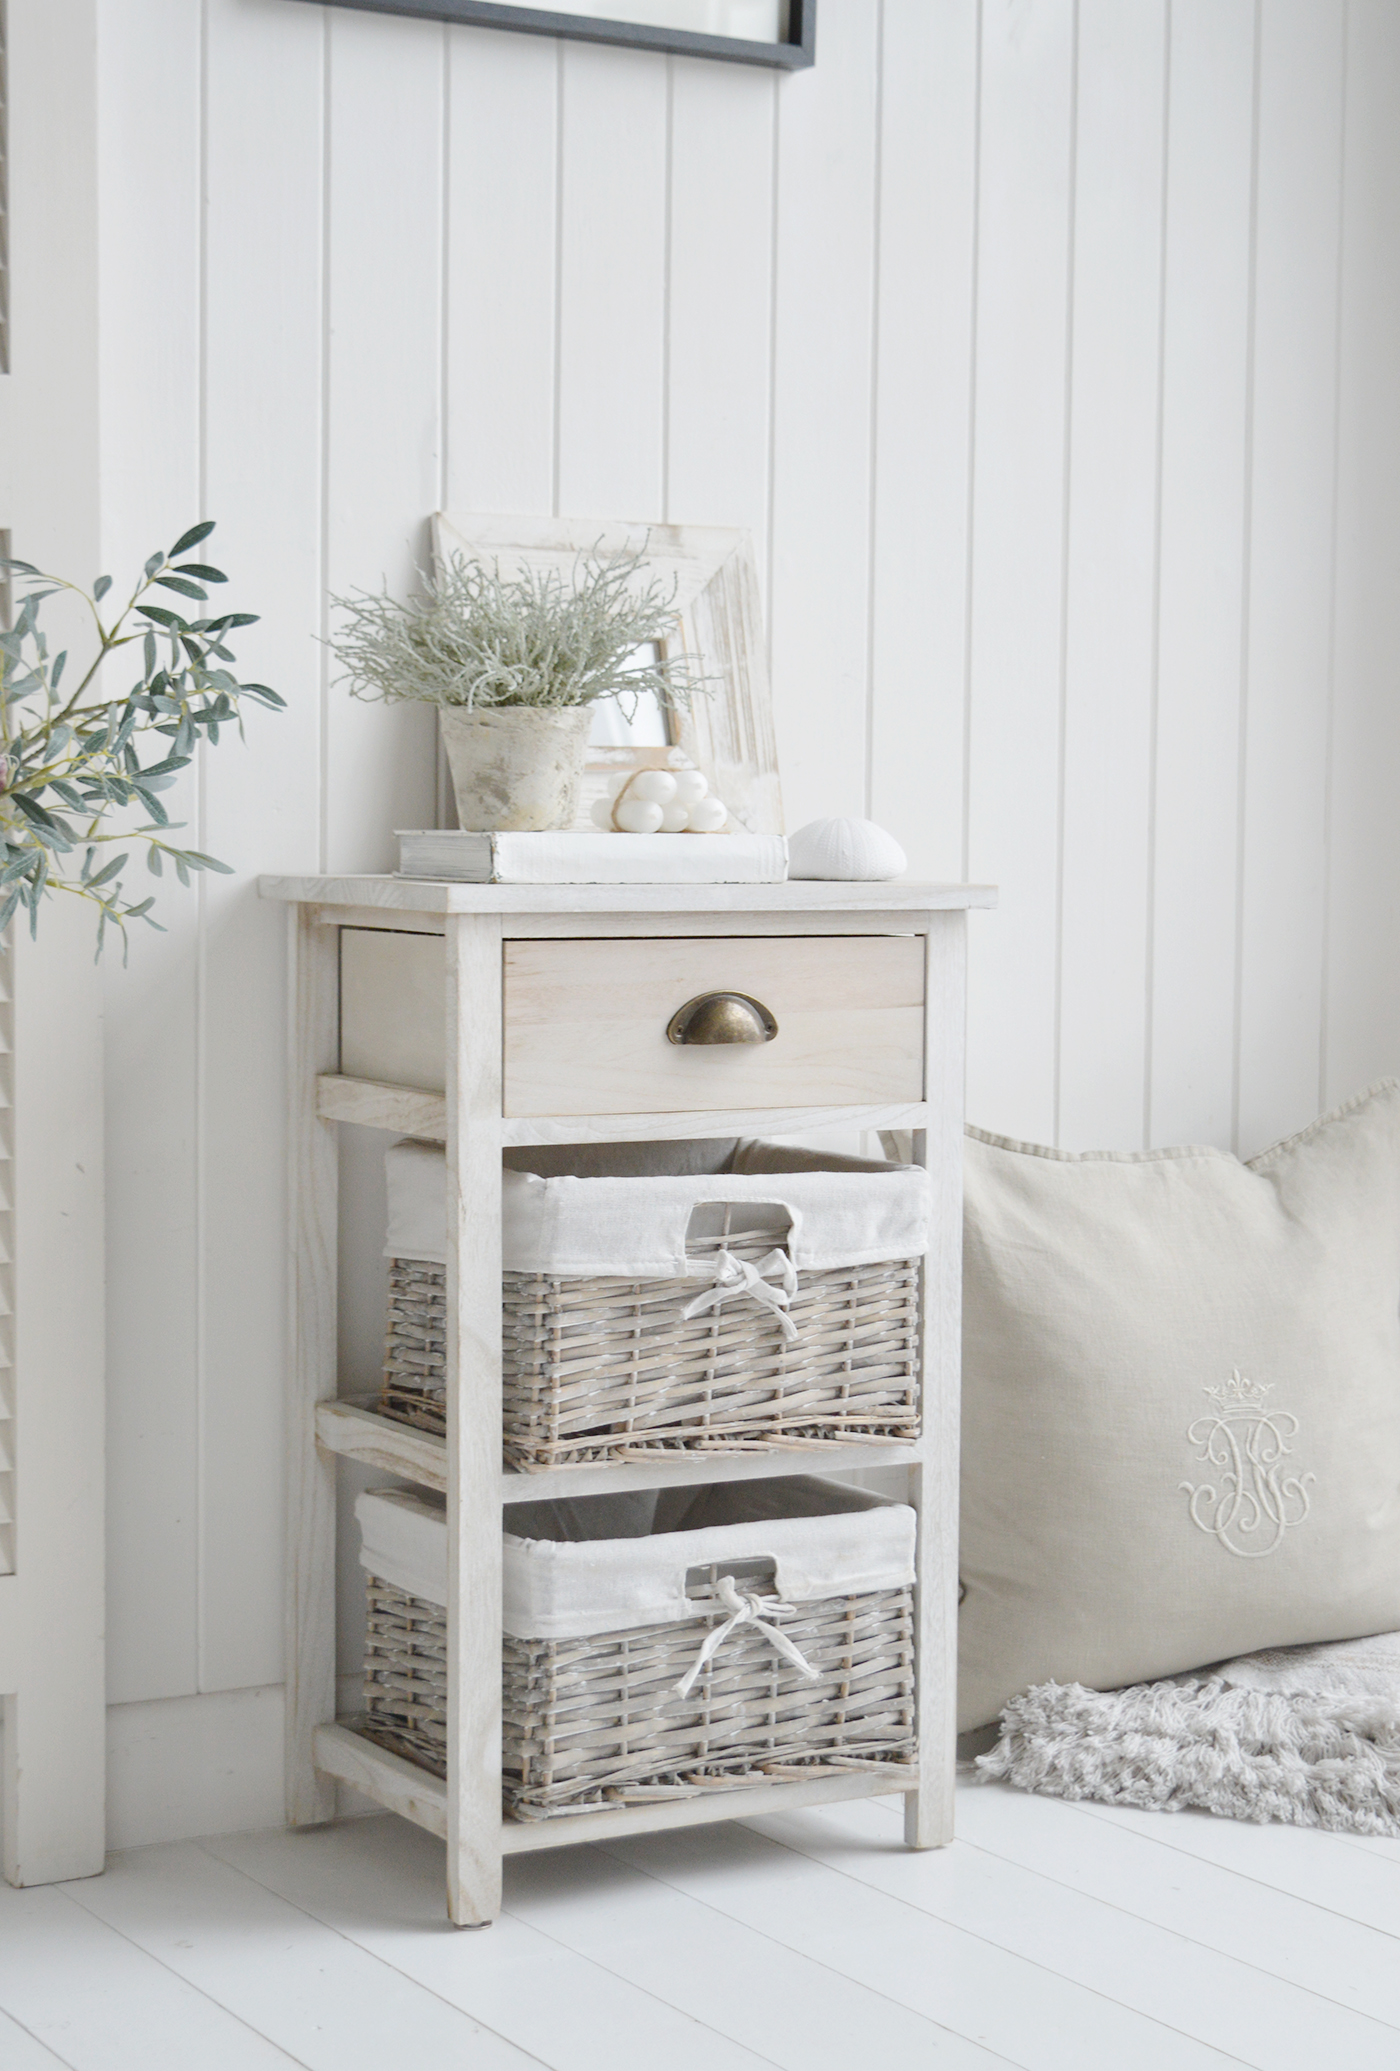 Dorset Cabinet with 3 Drawers in light grey washed wood - New England Coastal and Modern Country Furniture. Storage furniture with baskets. An ideal bedside cabinet